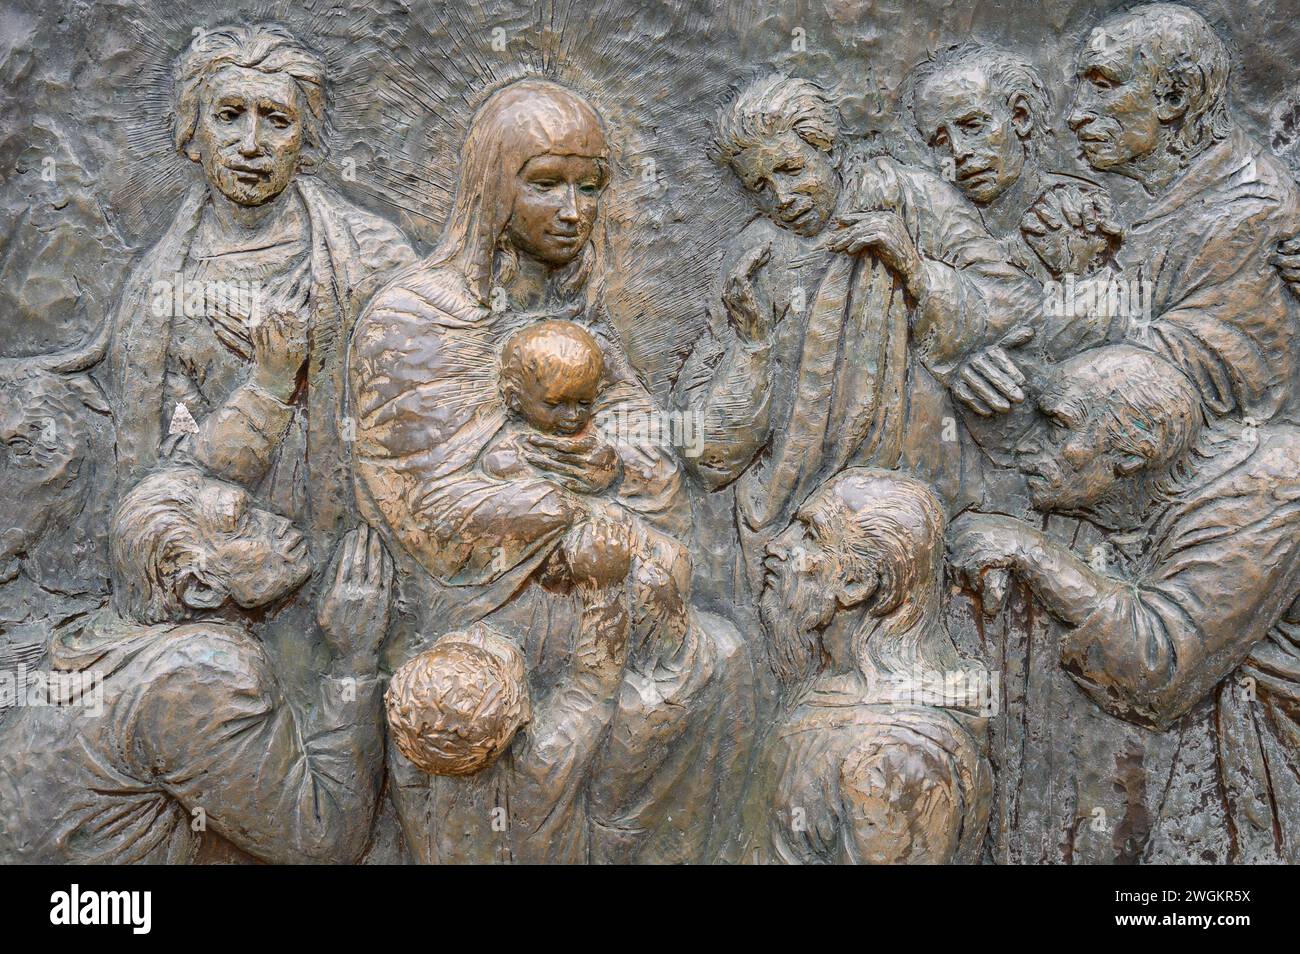 The Nativity of Jesus – Third Joyful Mystery of the Rosary. A relief sculpture on Mount Podbrdo (the Hill of Apparitions) in Medjugorje. Stock Photo